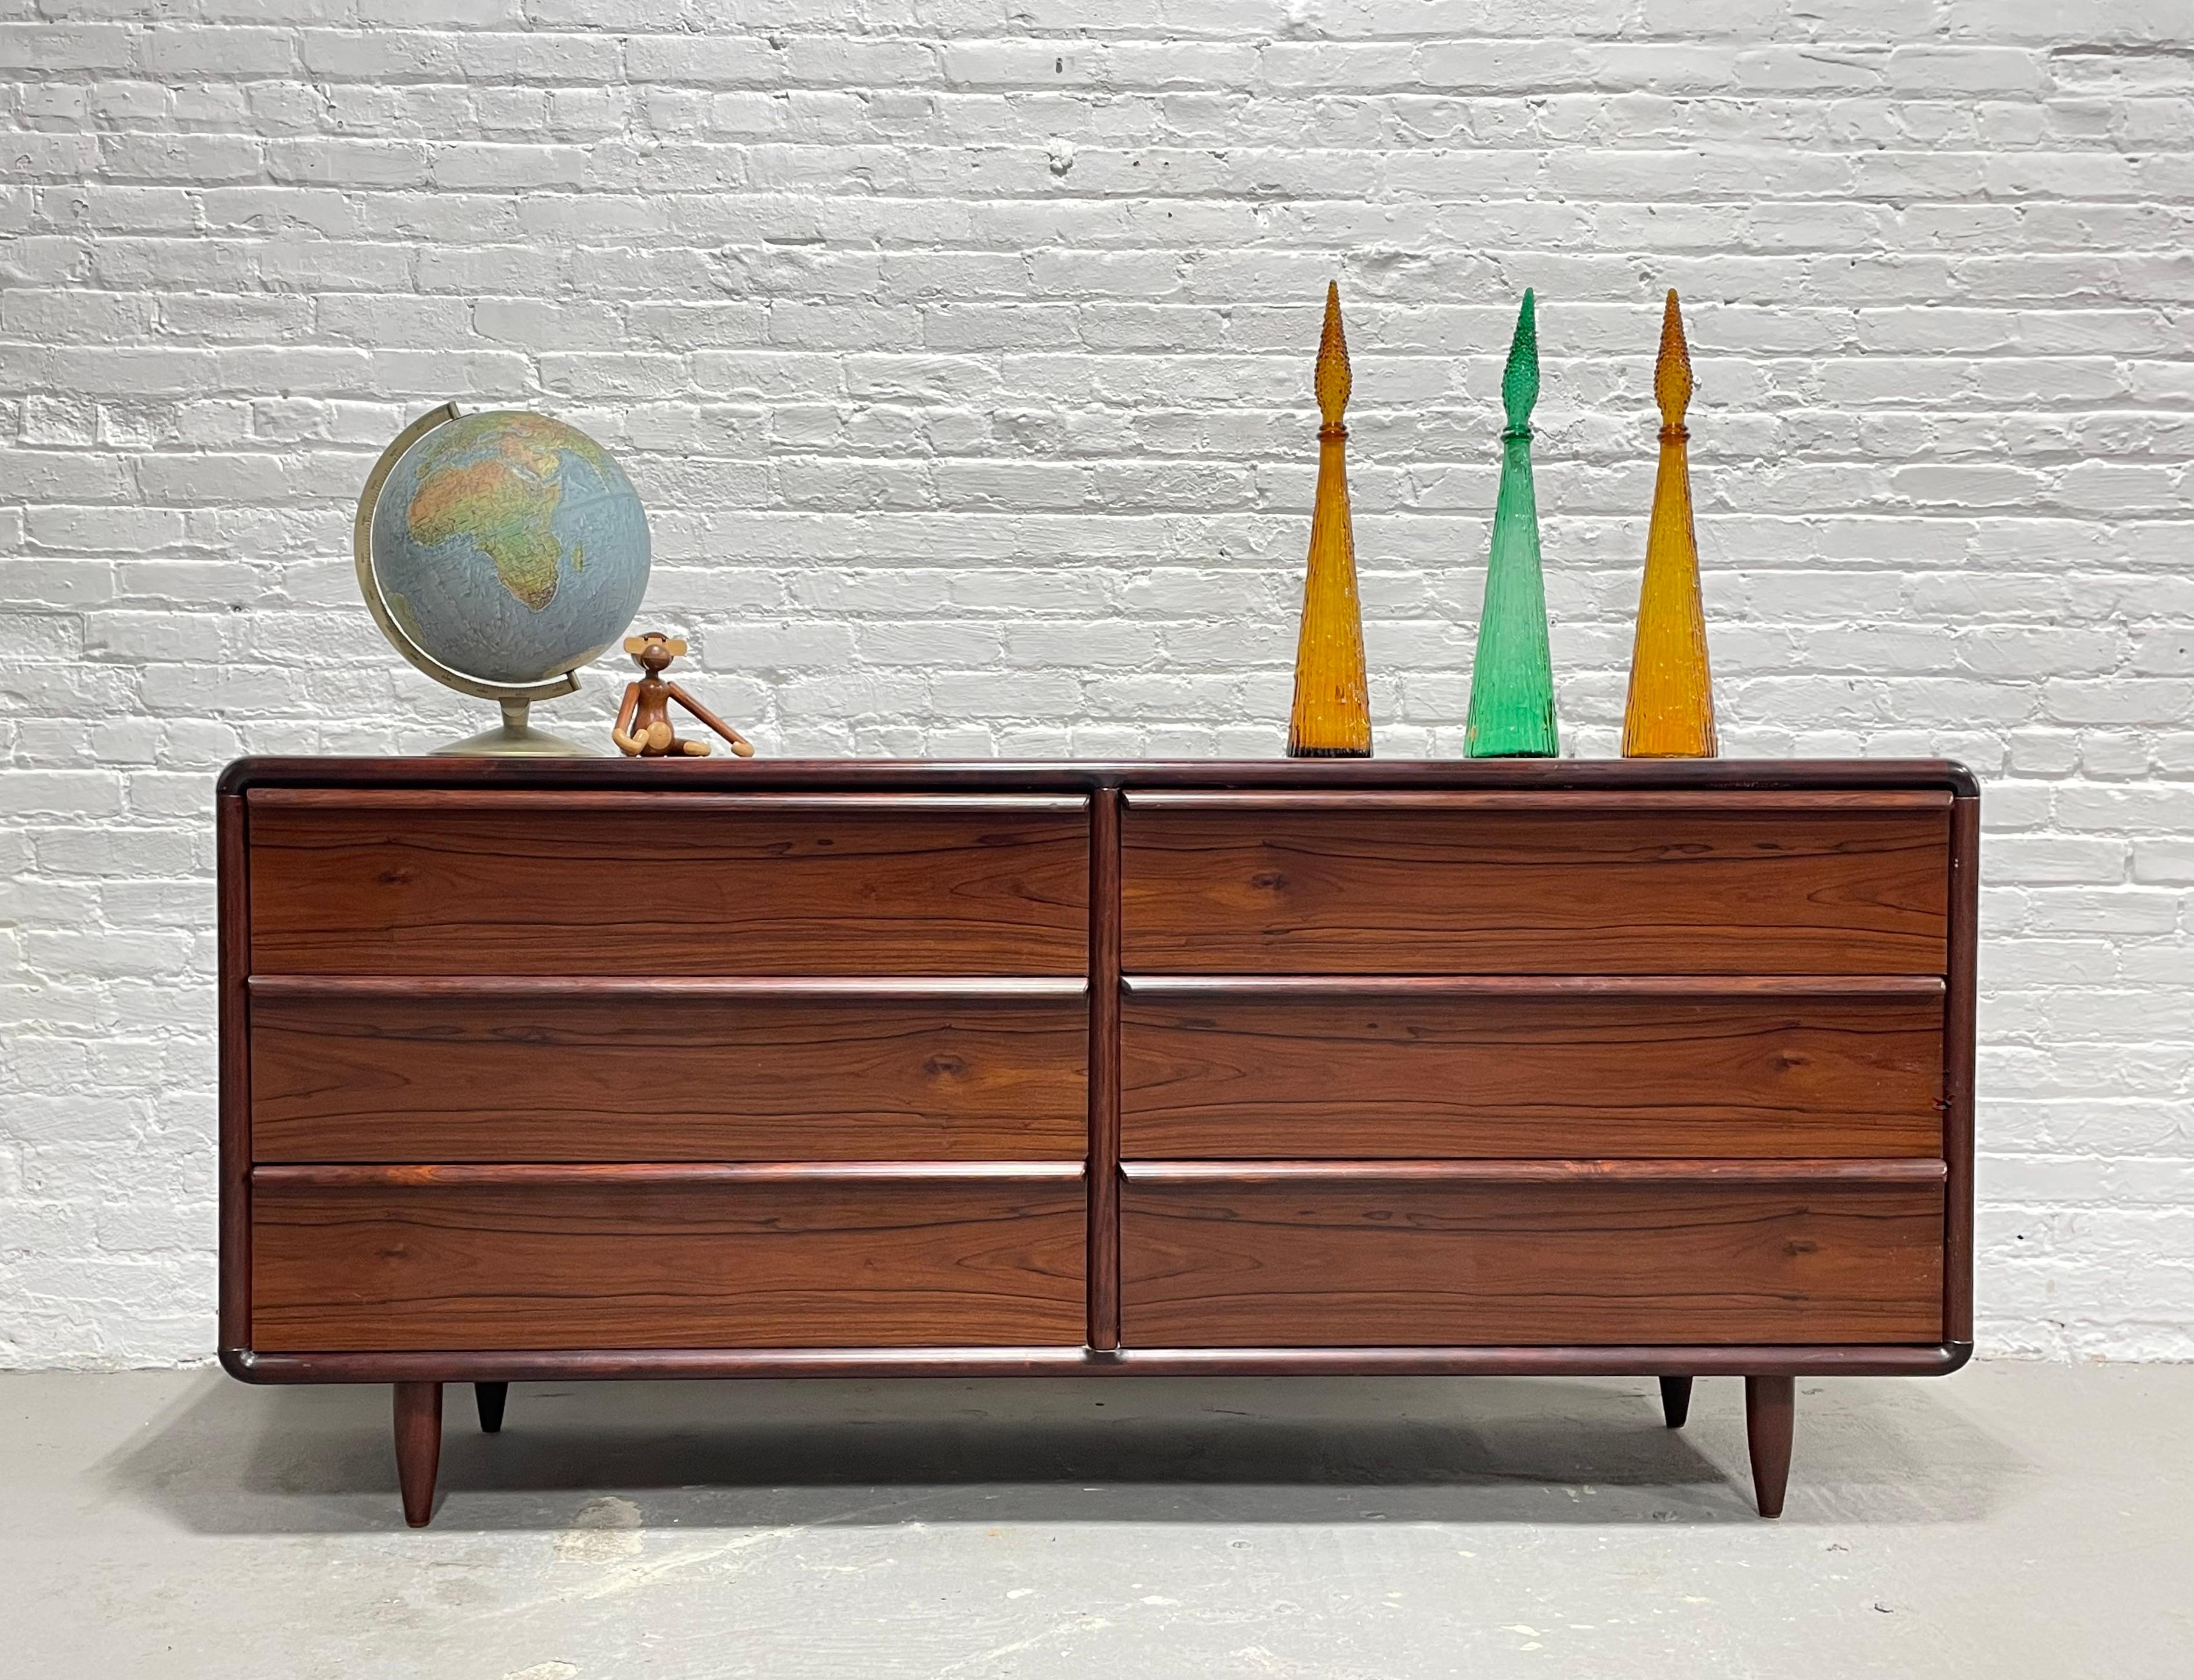 Incredible Mid Century Modern Rosewood Double Dresser by Kibaek Mobelfabrik, c. 1960's. This piece features some of the most stunning wood grains we have ever seen. Constructed in rosewood and its deep, rich color and stunning wood grains will add